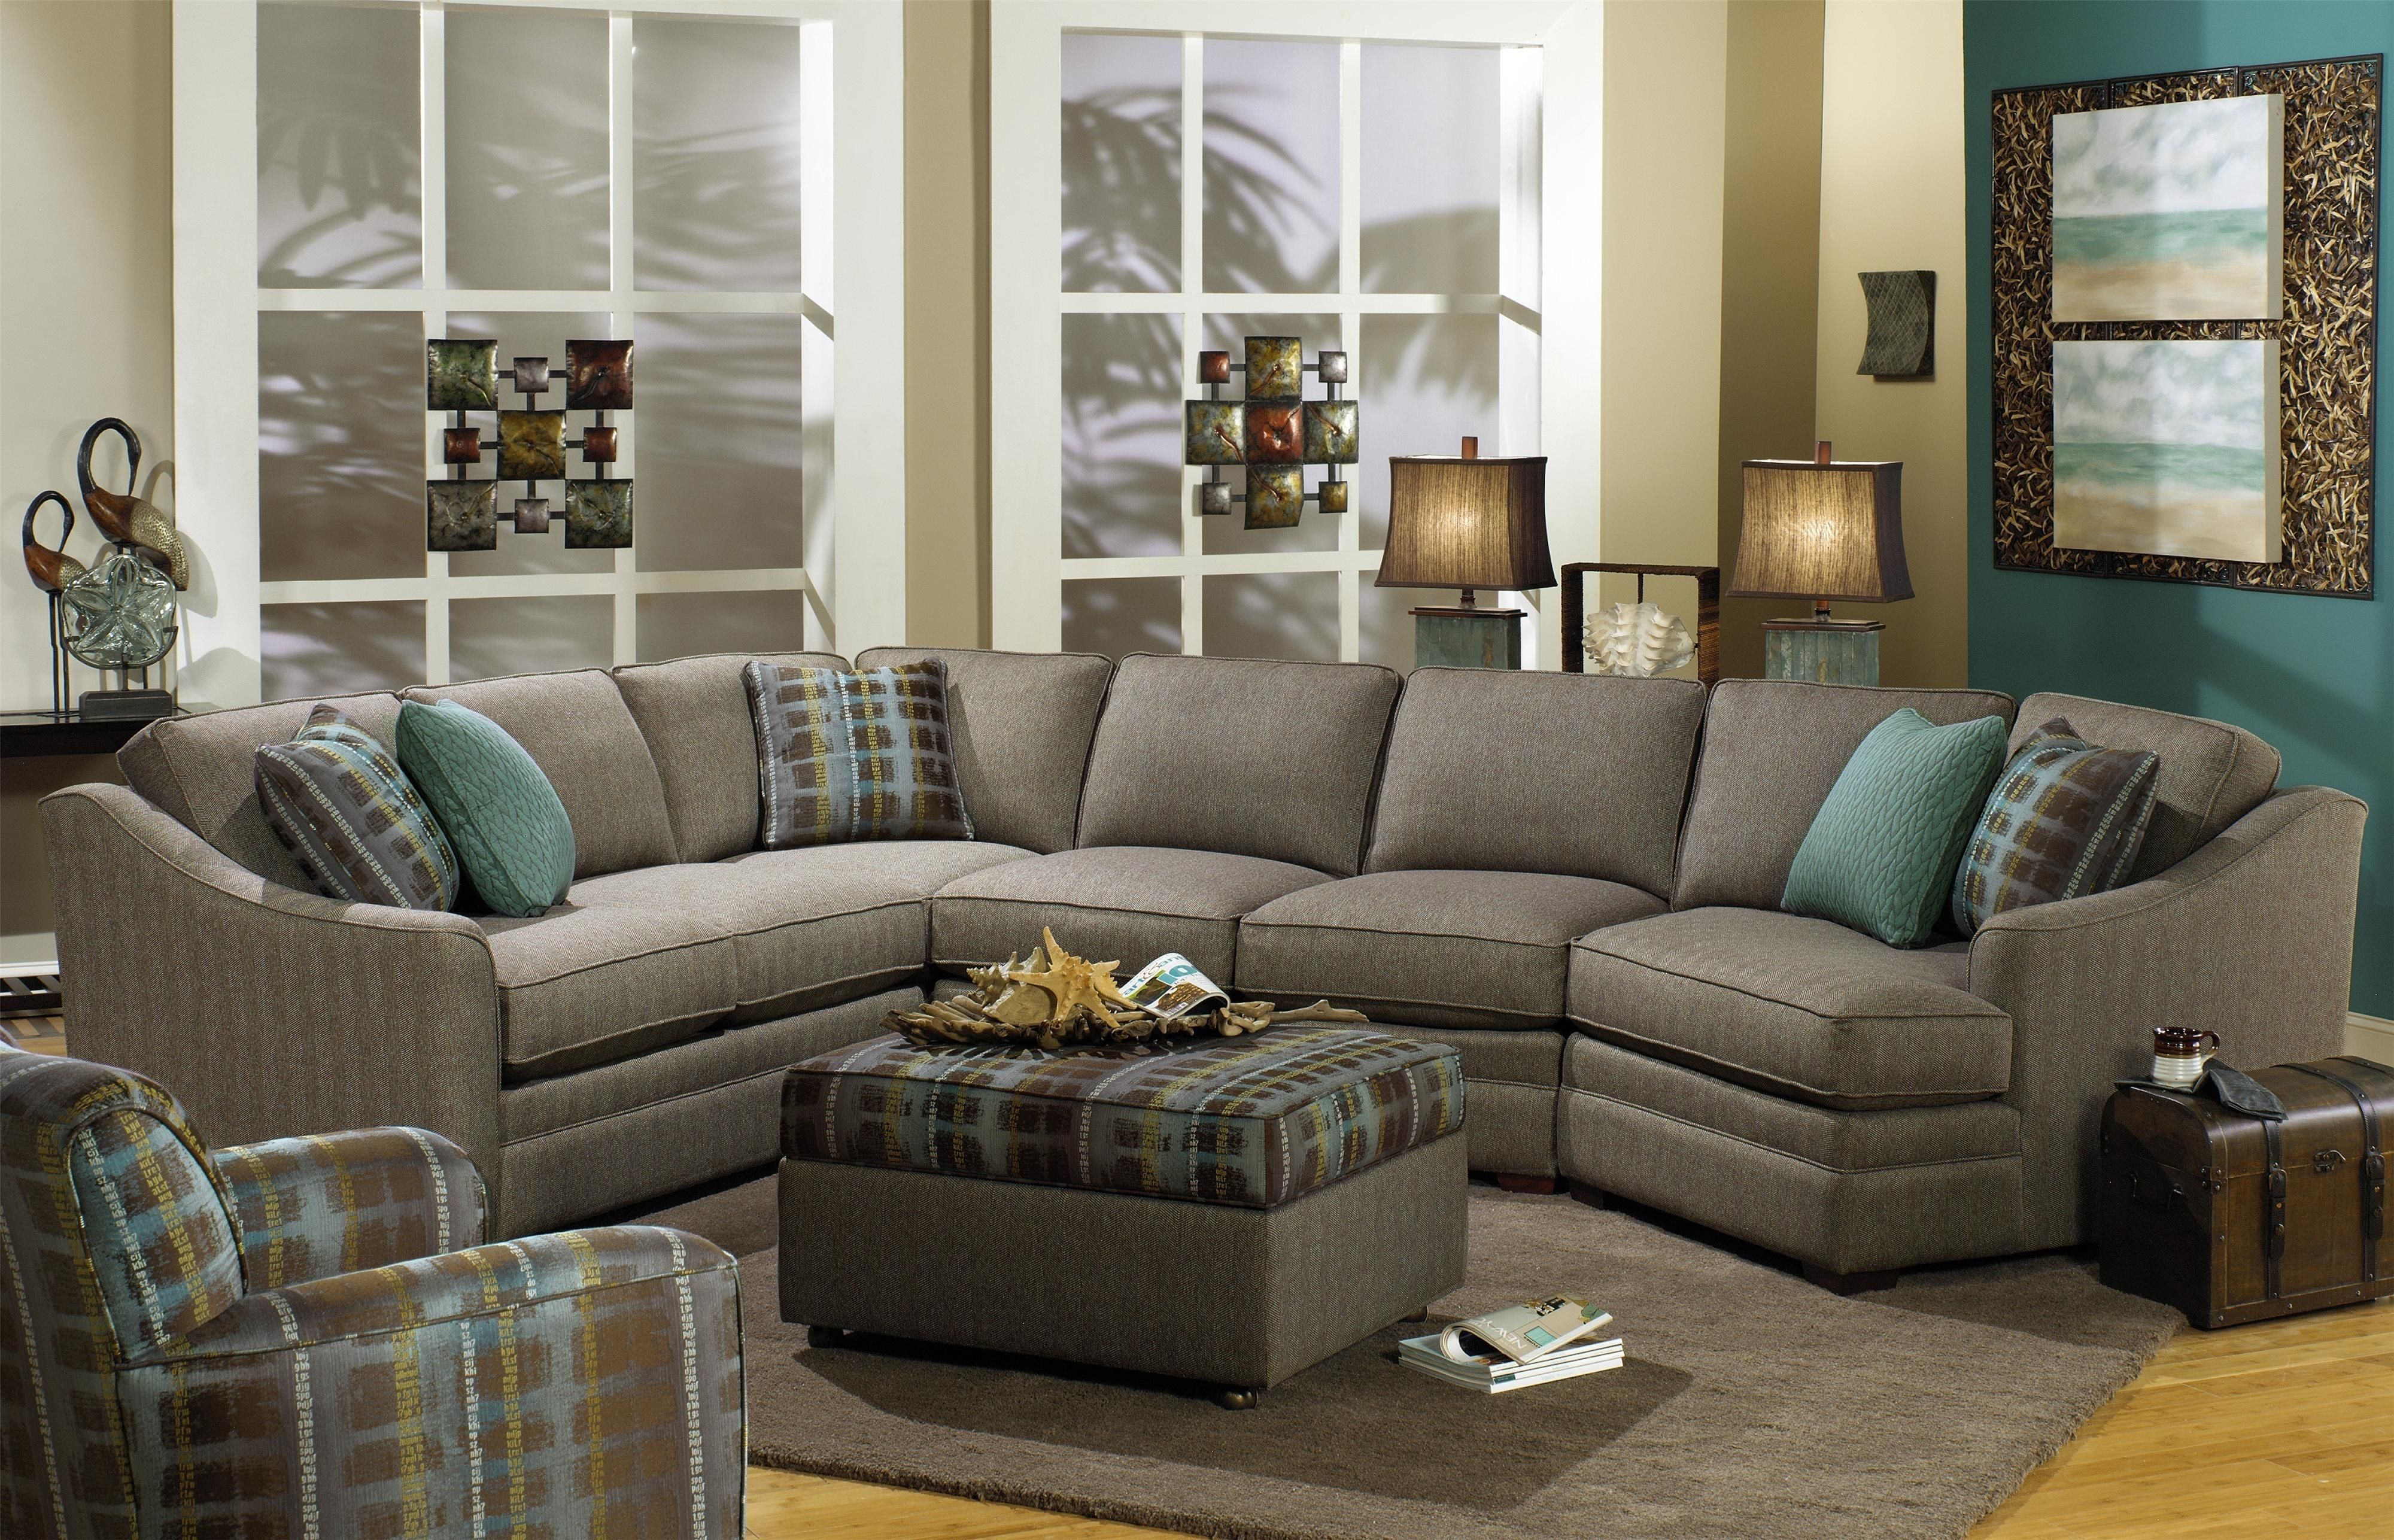 F9 Custom Collection Customizable 3 Piece Sectional With Laf Cuddler Inside Pensacola Fl Sectional Sofas (Photo 10 of 10)